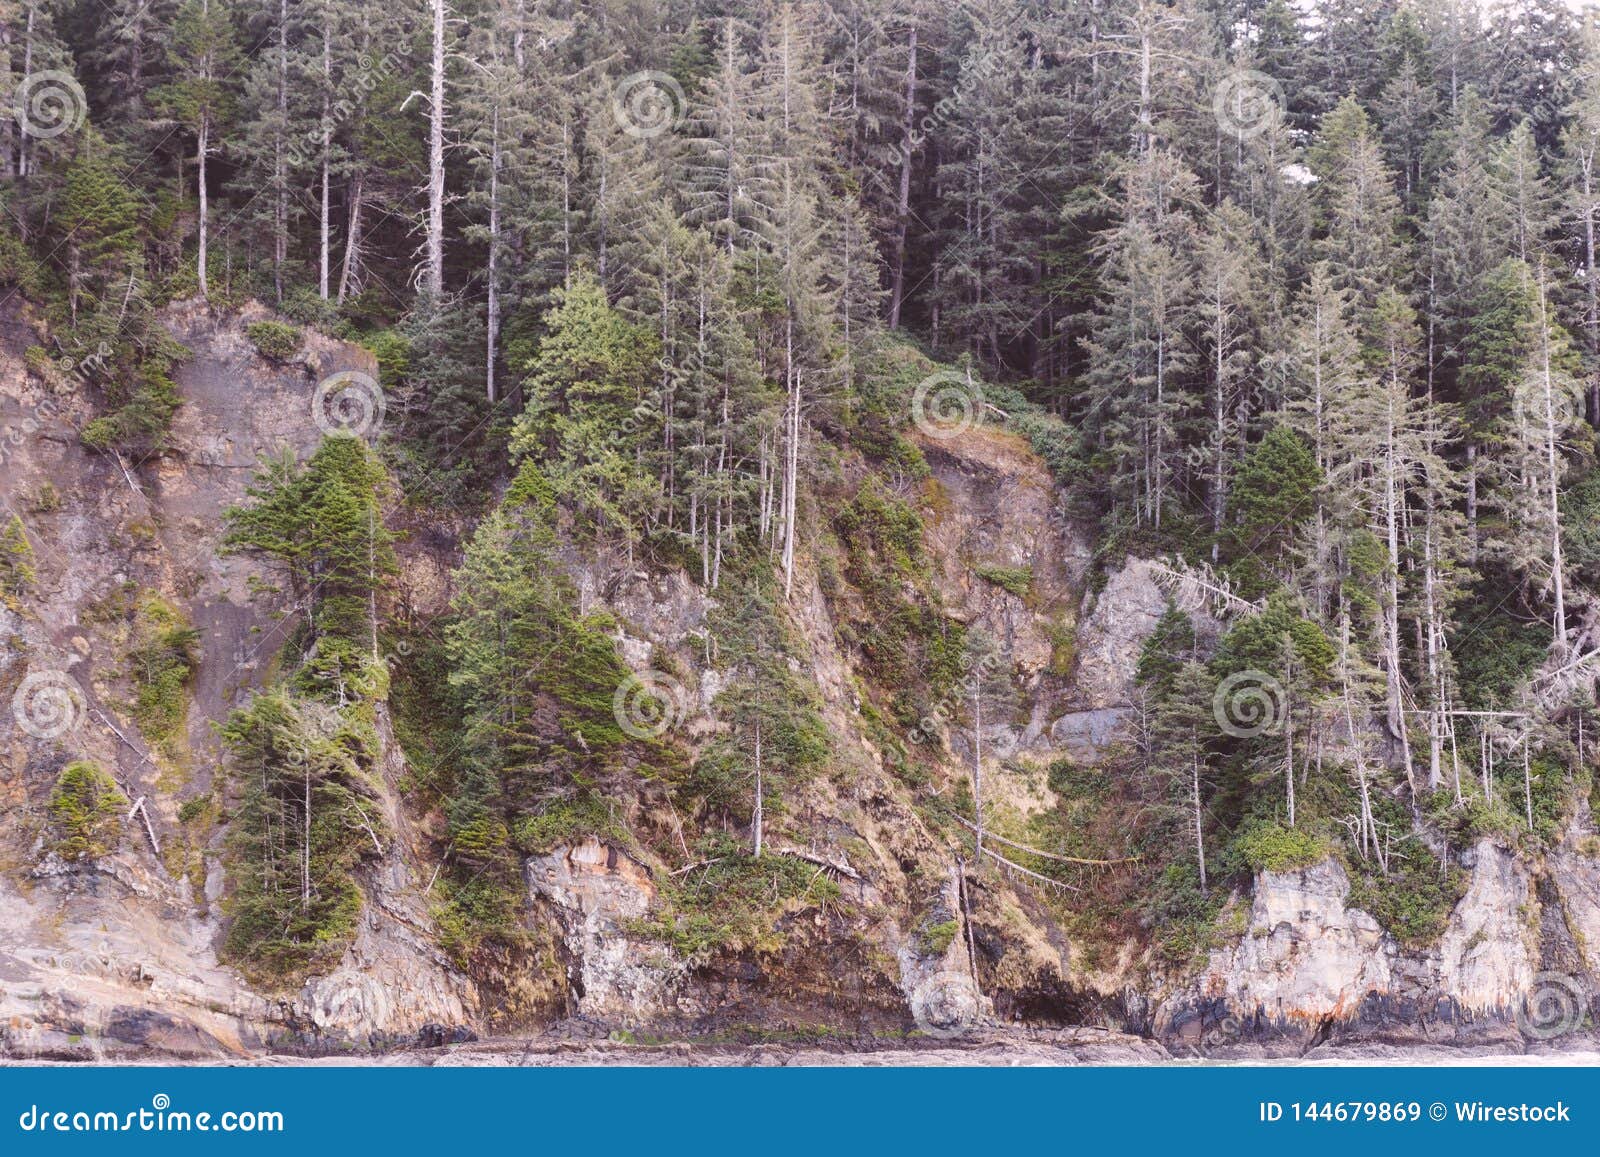 Trees Grown on a Side of a Rock Stock Image - Image of beauty, green